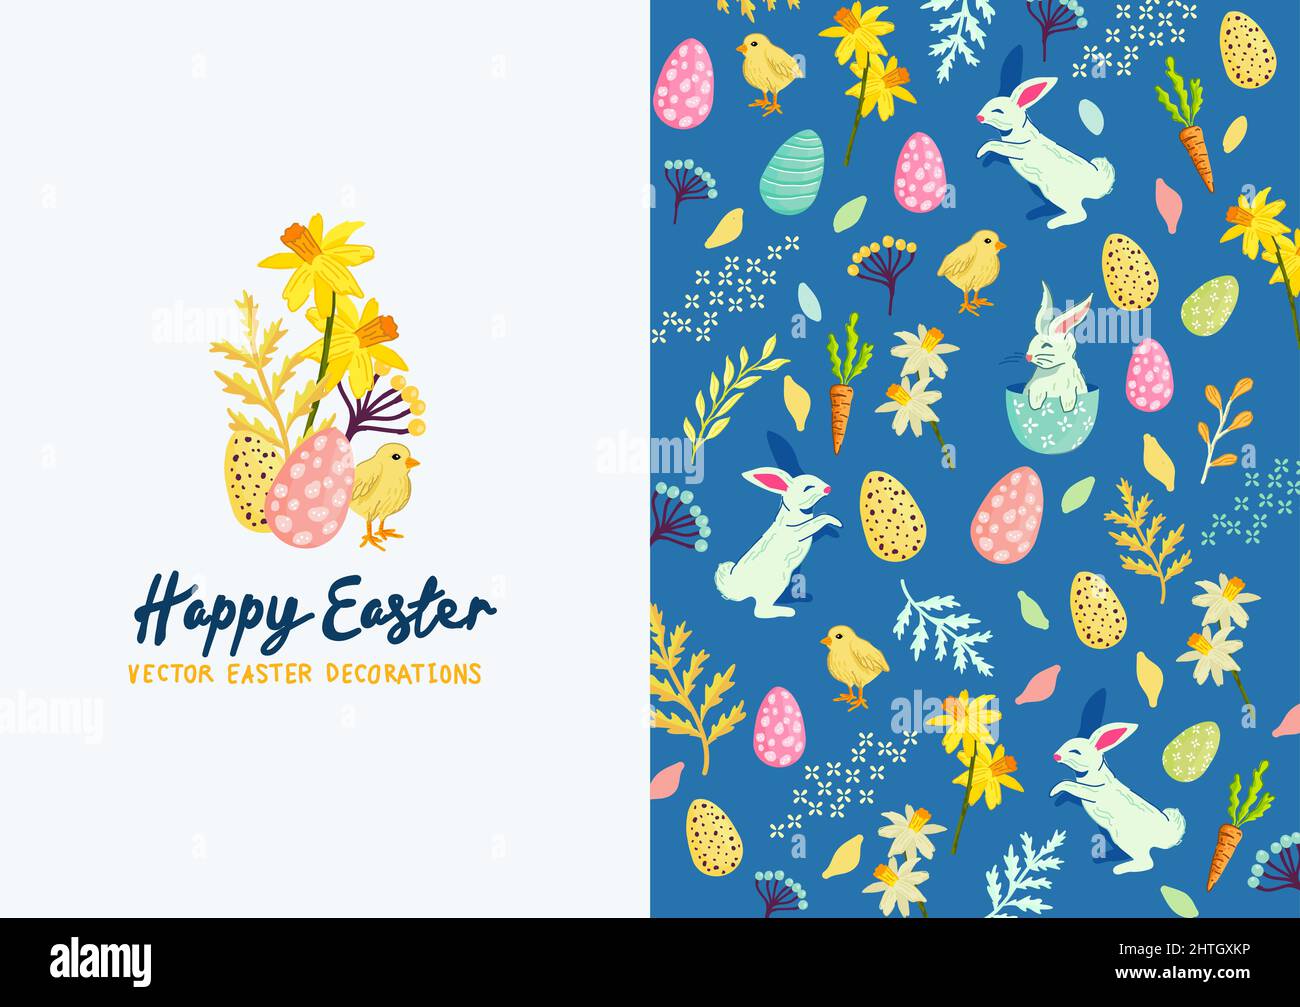 Festive spring and easter decorations layout background, Vector illustration Stock Vector